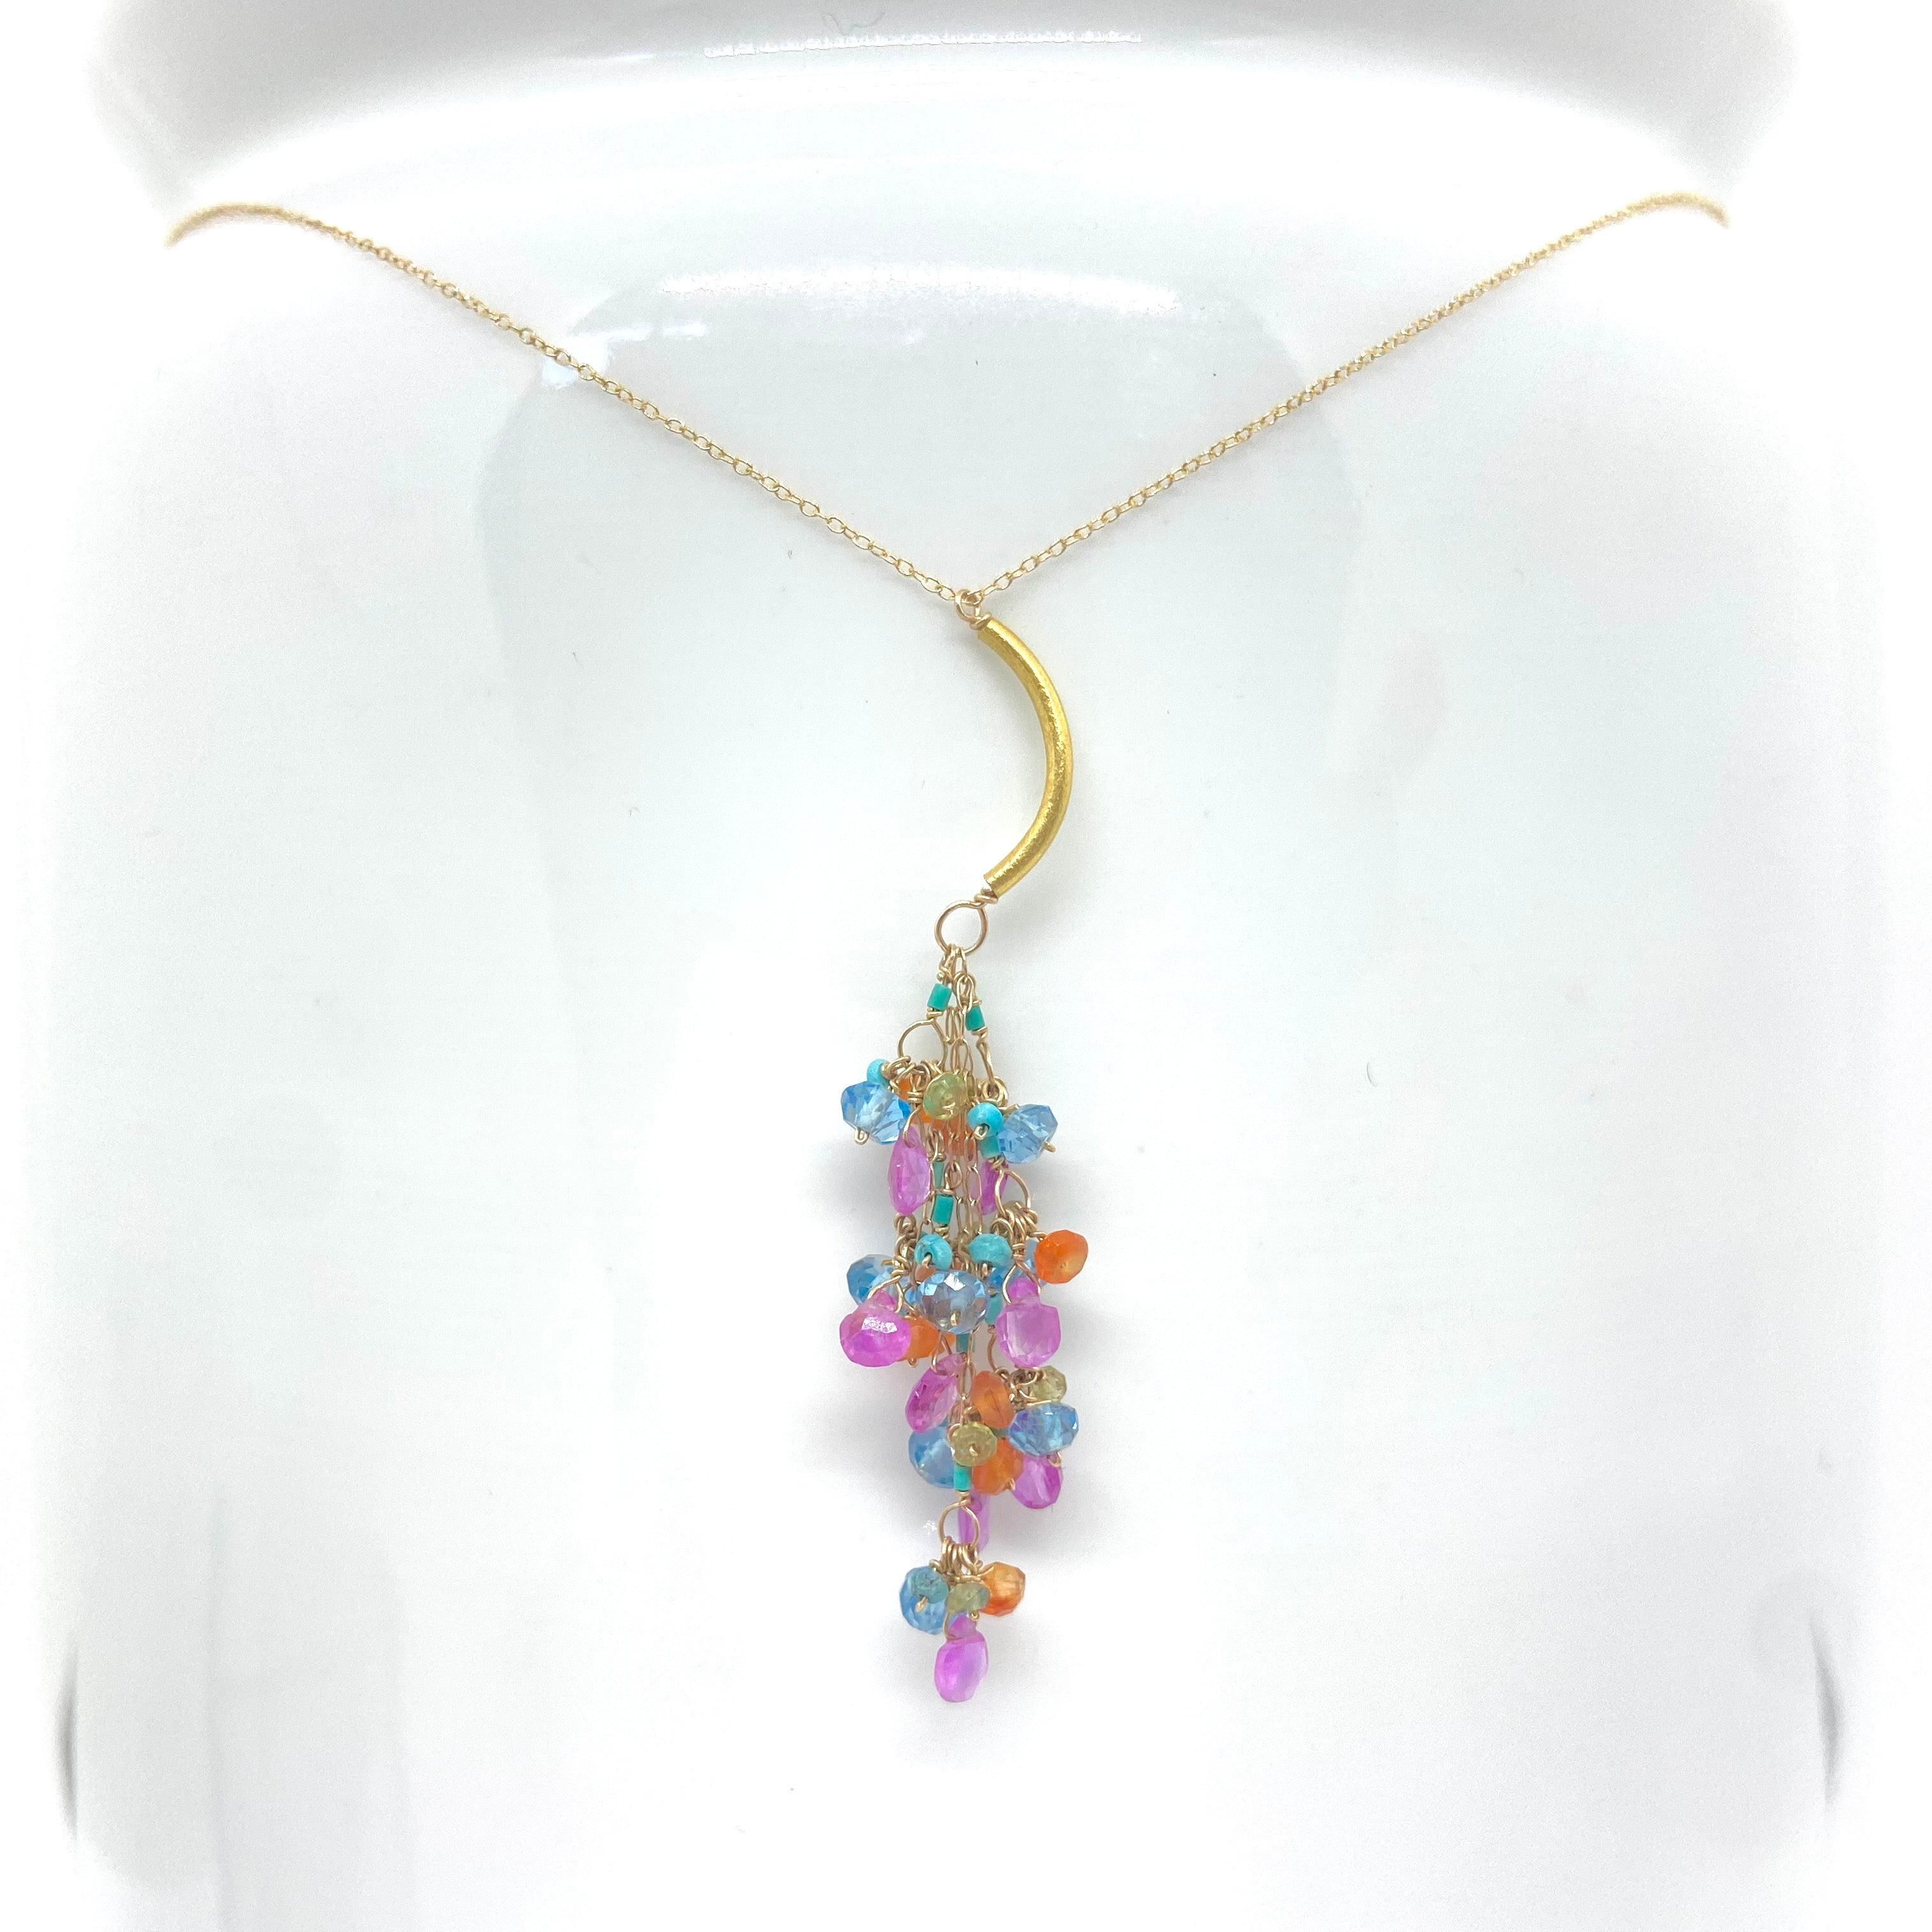 14k Gold Chain Necklace w/ 18k Gold Pendant, Pink Sapphires, Blue London Topaz, Carnelian, Afghan Turquoise & Grey Sapphires